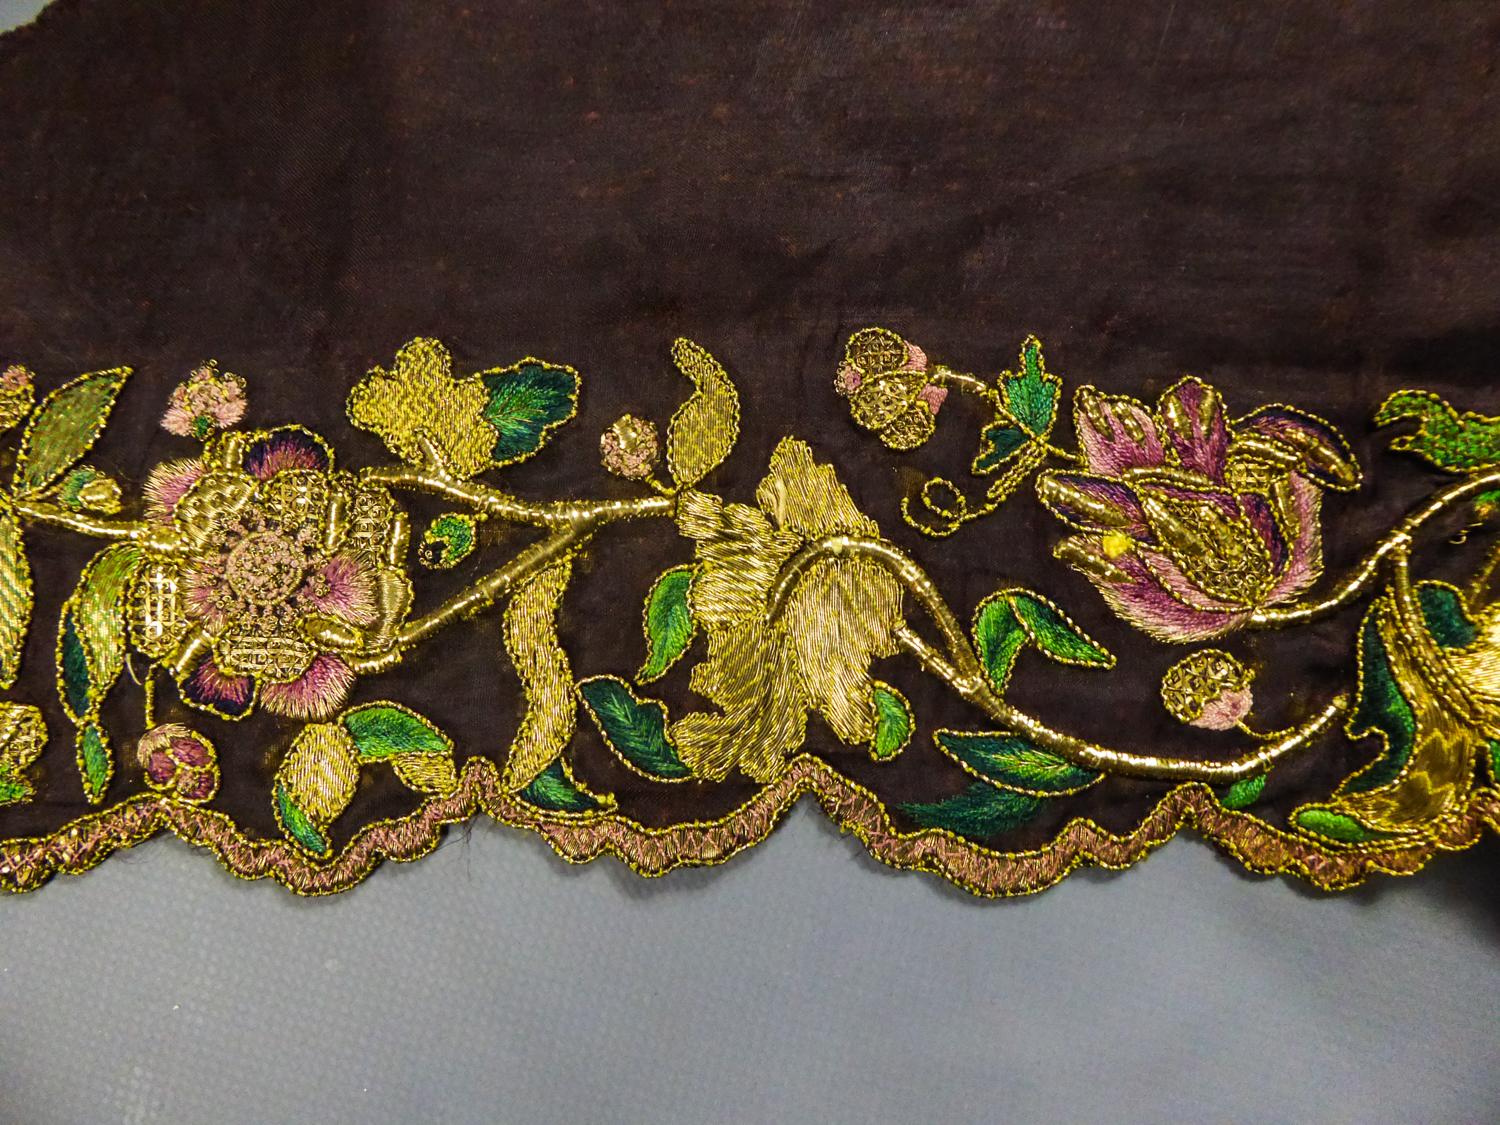 Women's or Men's A gold and silk embroidered Fichu or Palatine Fichu Scarf - Europe - Circa 1700